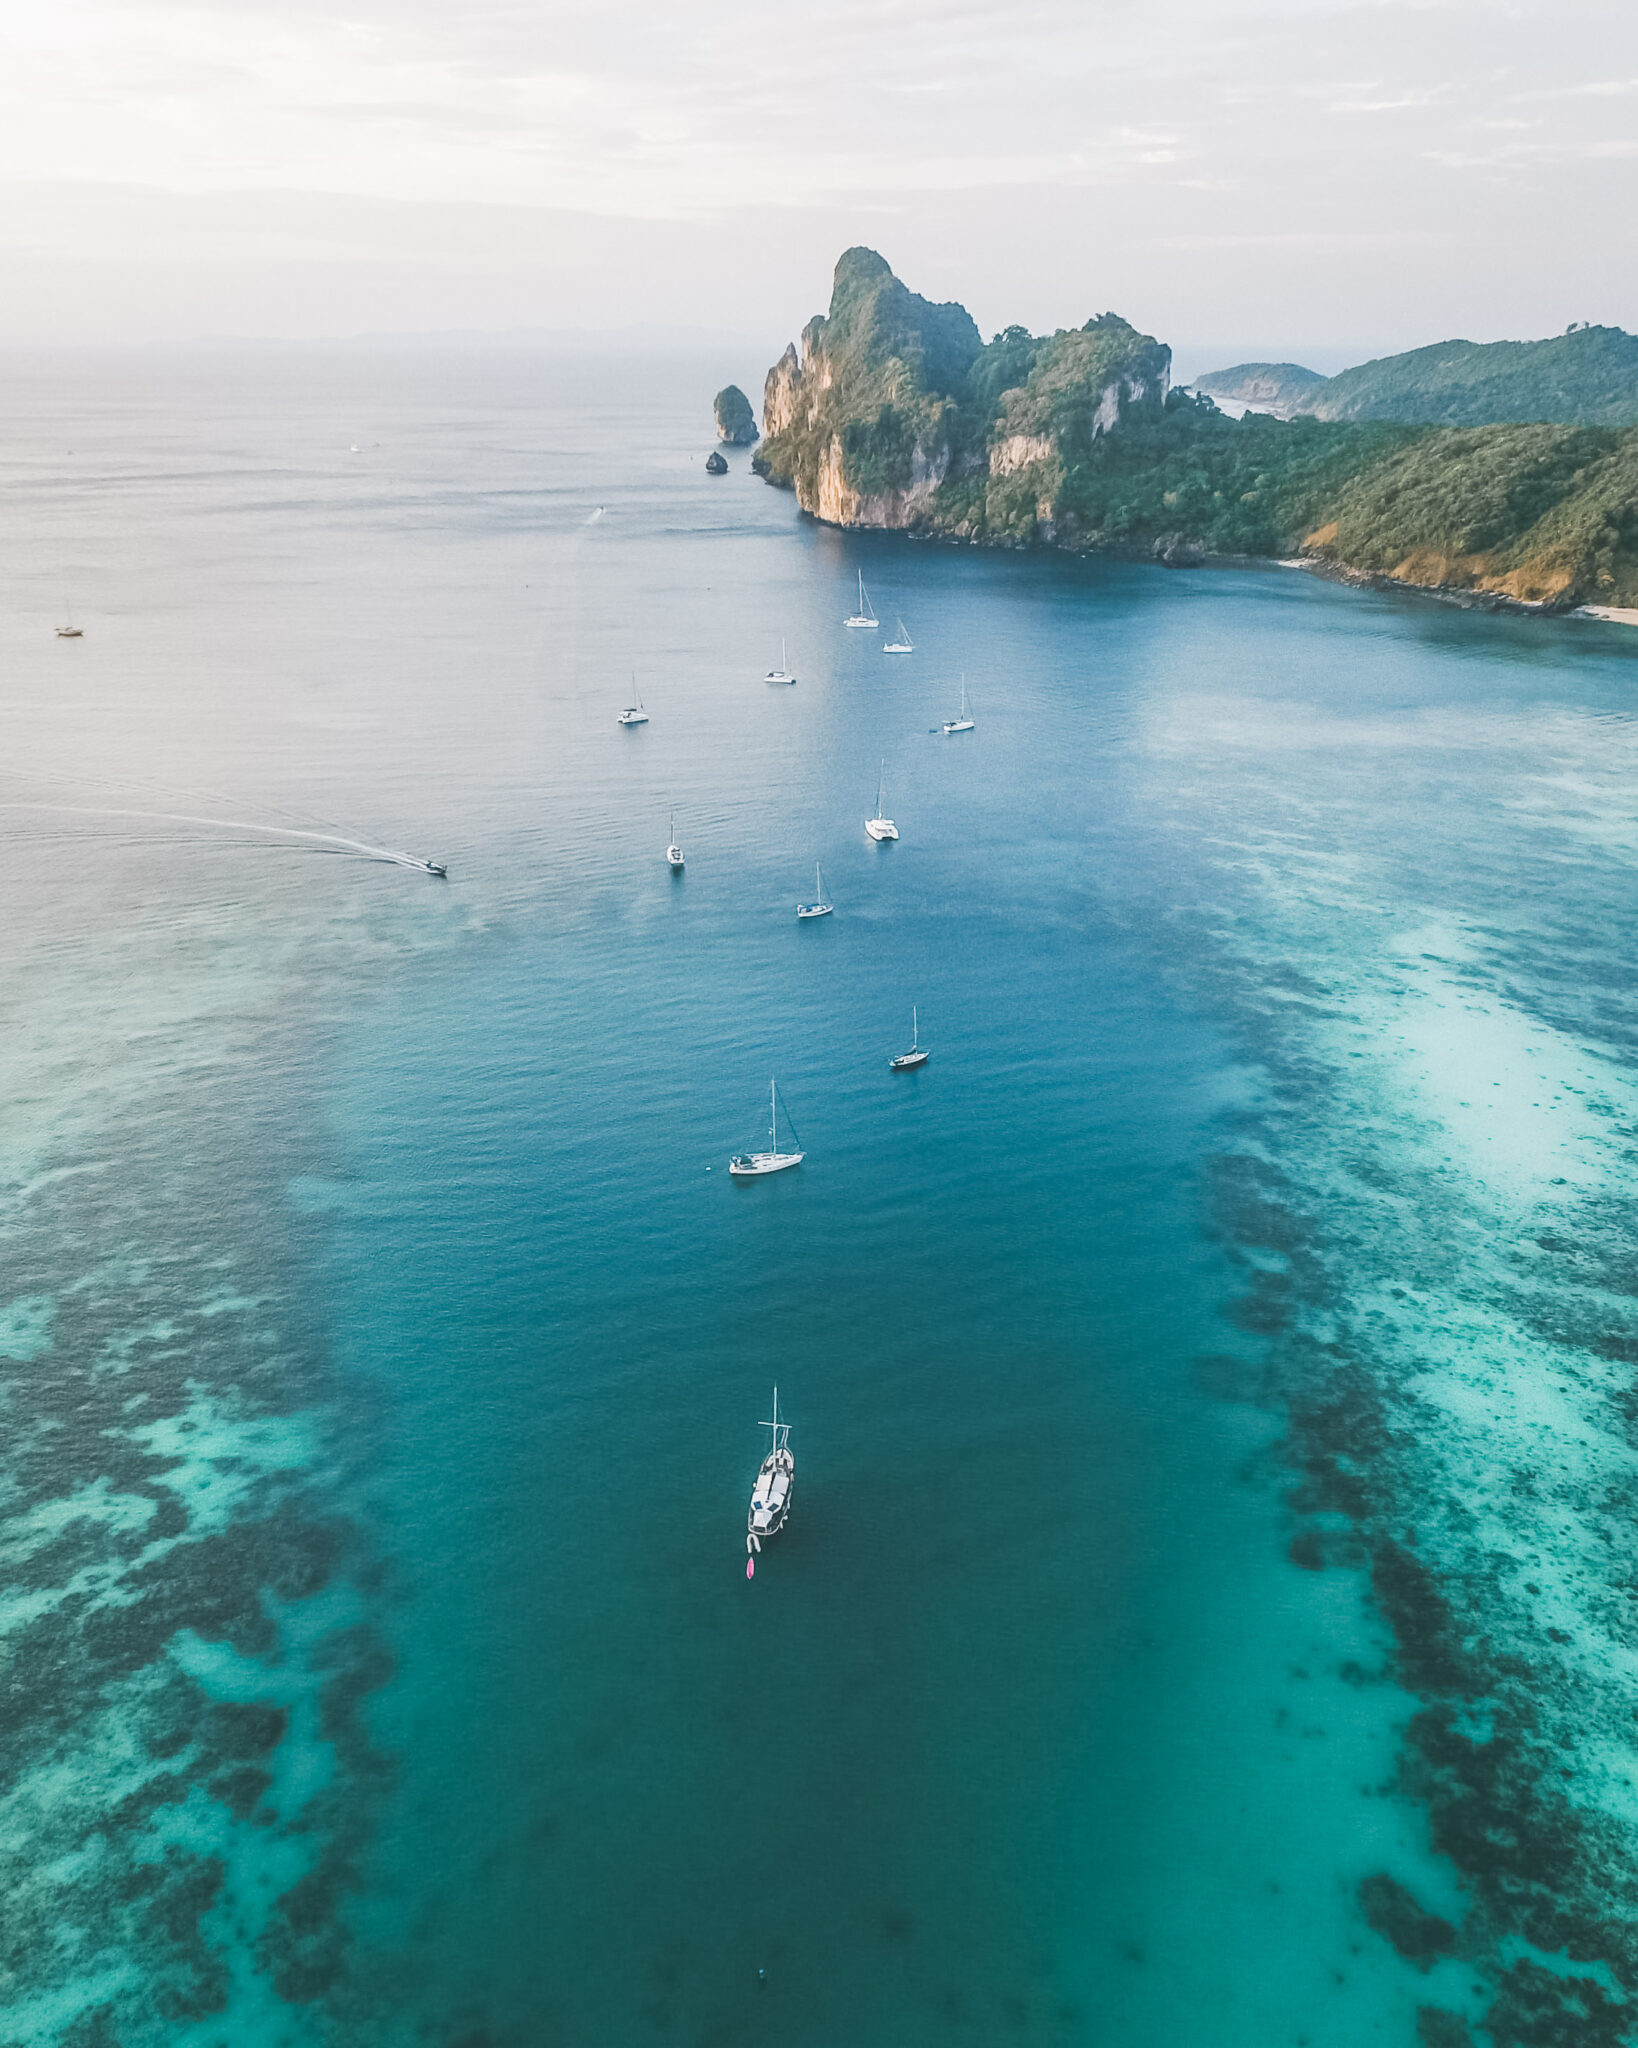 Boats are shown all across the clear waters of Phi Phi Islands in Thailand. This article covers family-friendly things to do in Thailand.